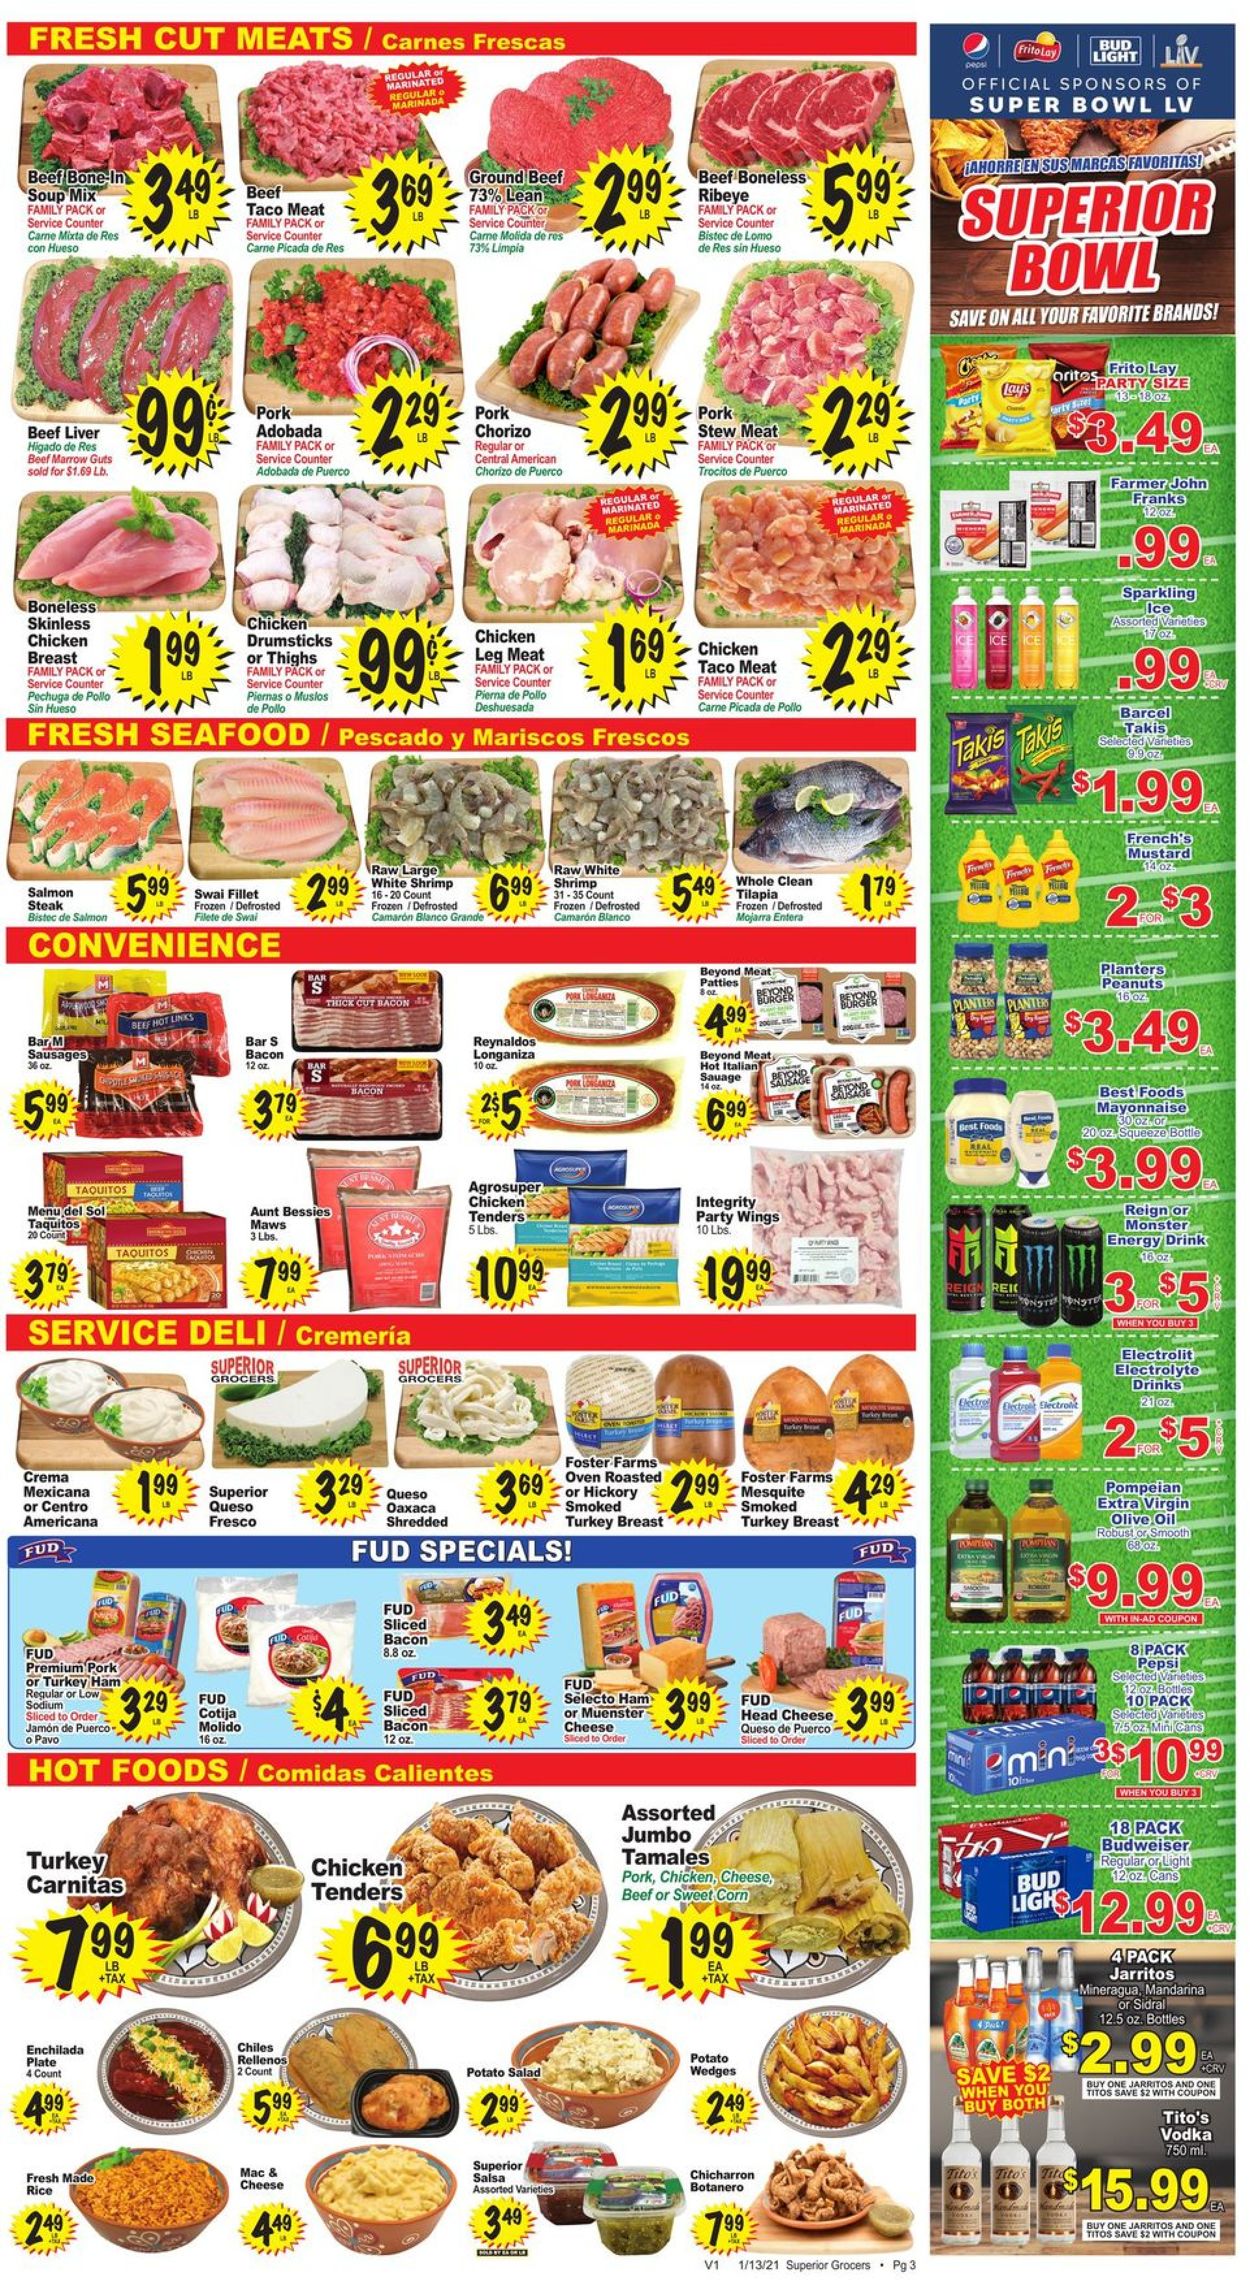 Catalogue Superior Grocers from 01/13/2021